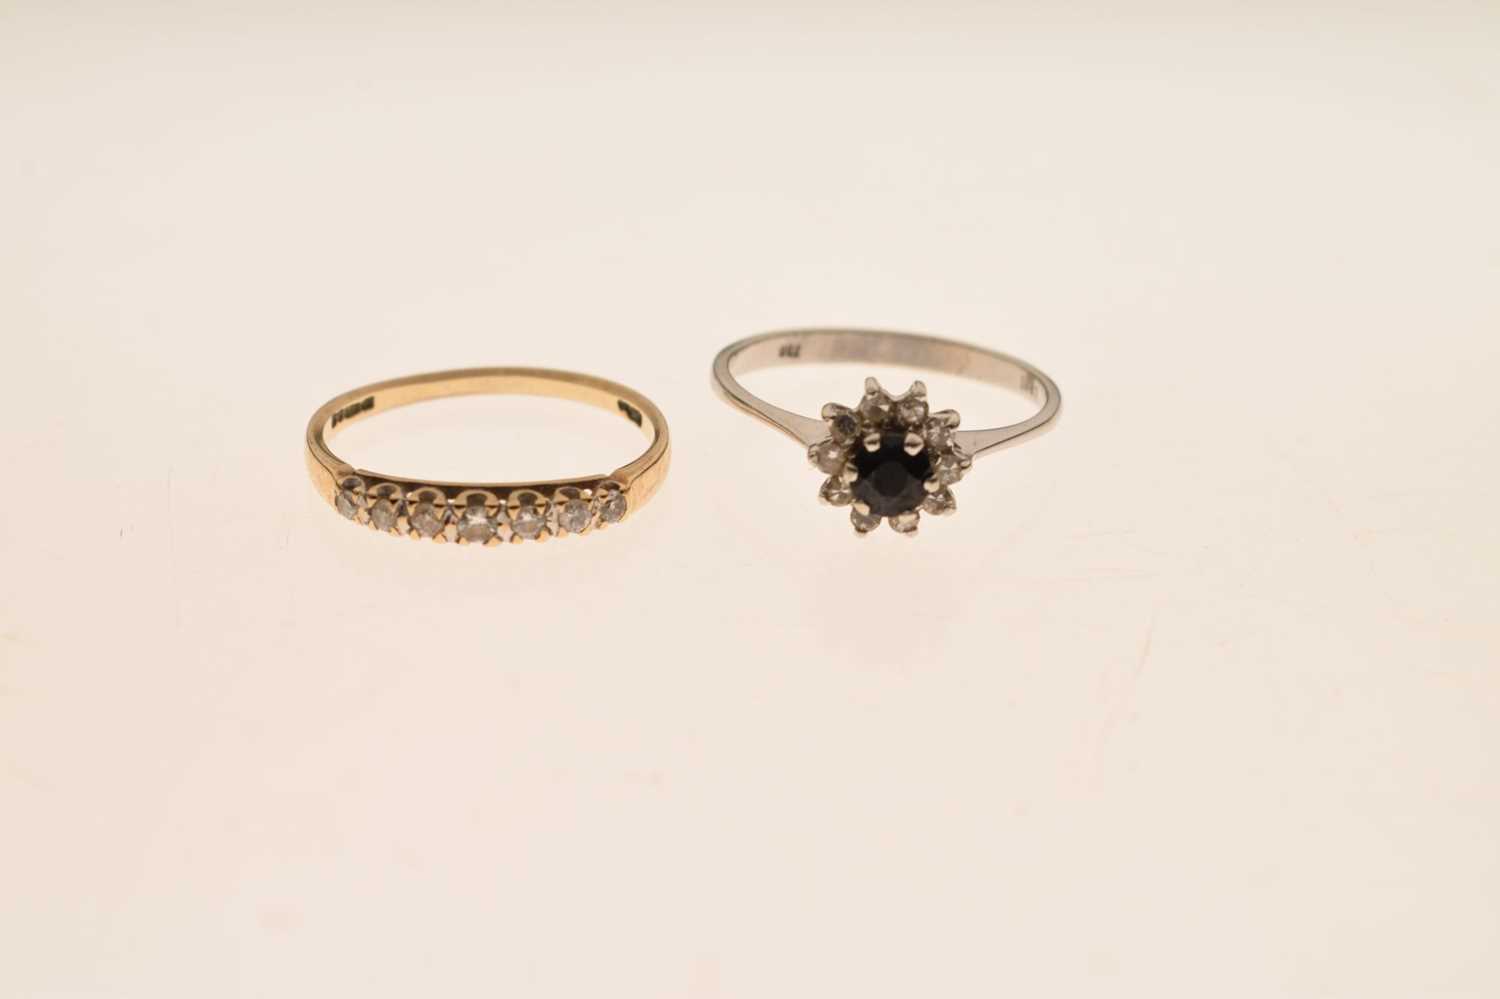 Sapphire and diamond white gold cluster ring, and a 9ct yellow gold seven-stone diamond ring - Image 6 of 6